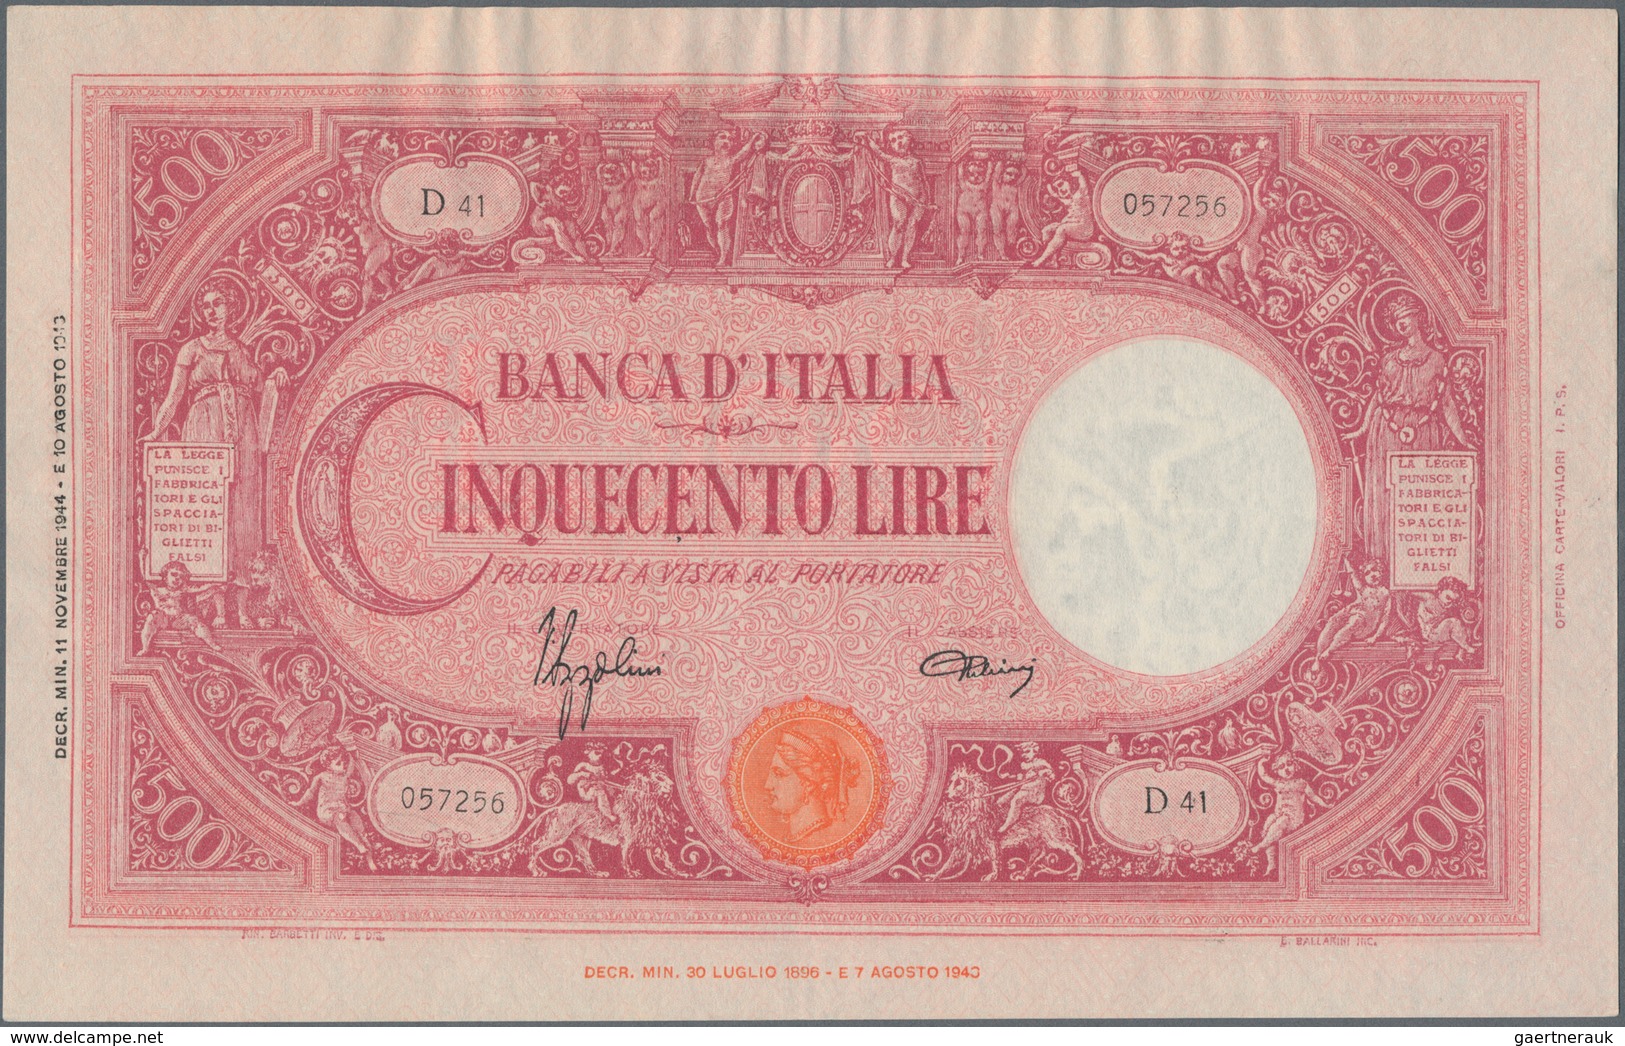 Italy / Italien: Huge album with 156 banknotes Italy, comprising for example 5 and 10 Lire Biglietti